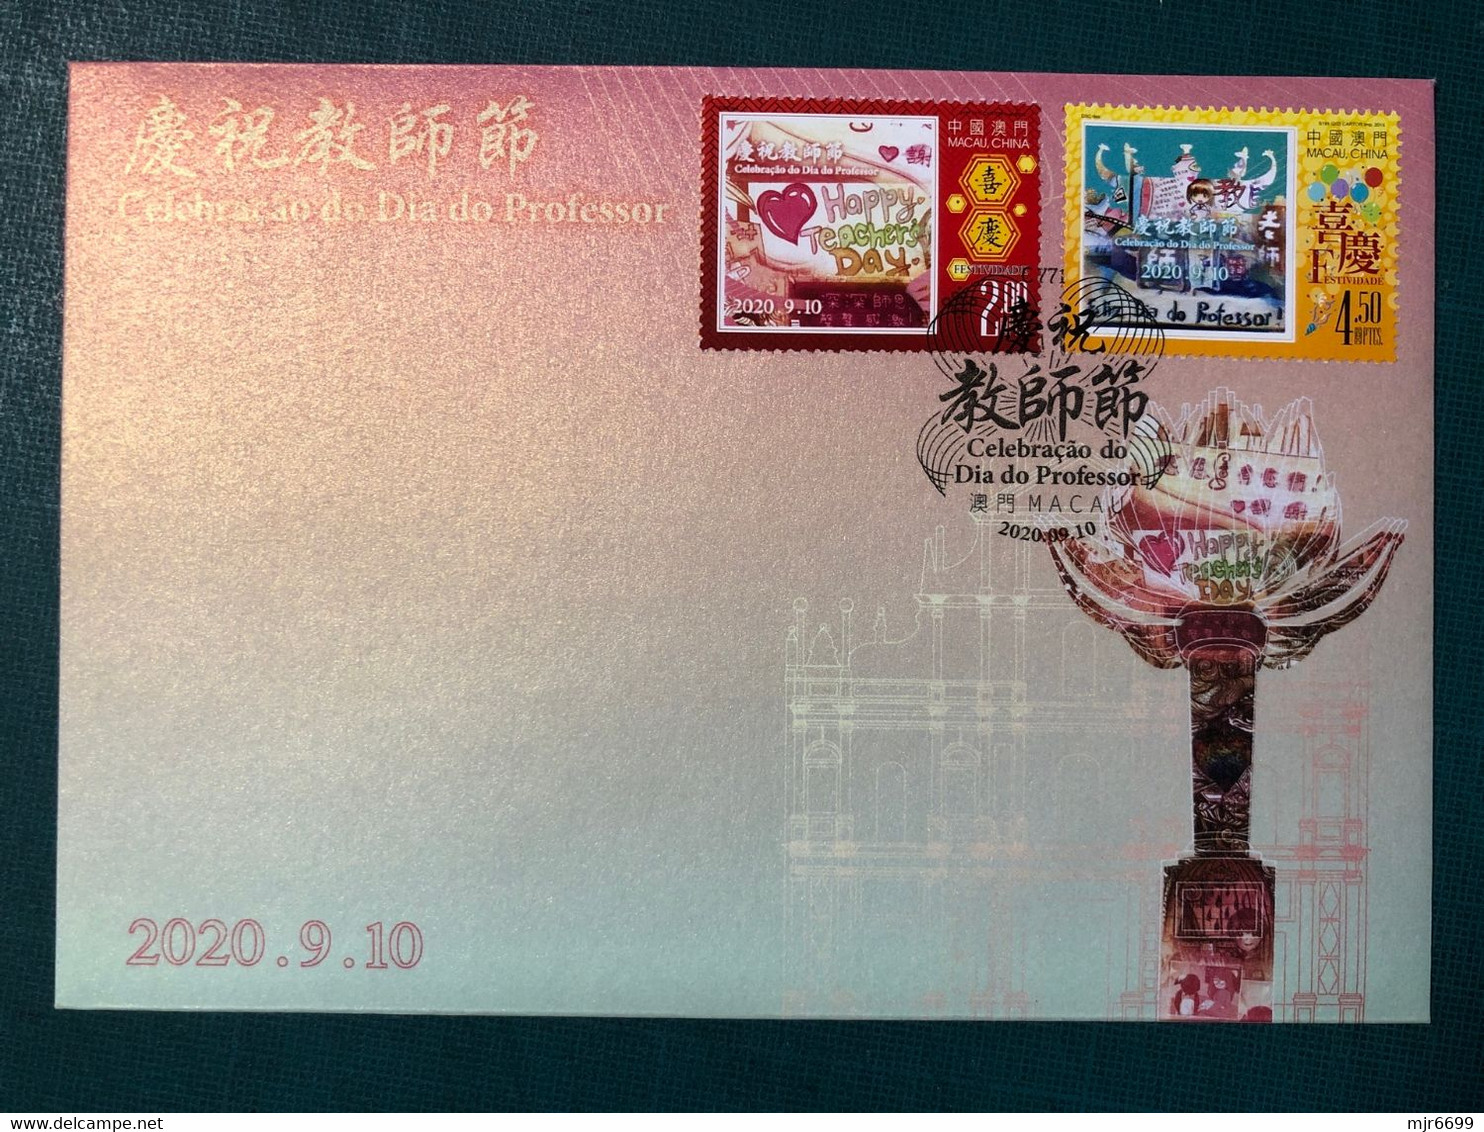 2020 TEACHER DAY SPECIAL COMMEMORATIVE COVER WITH SPECIAL PERSONALIZED STAMP, RARE - Covers & Documents